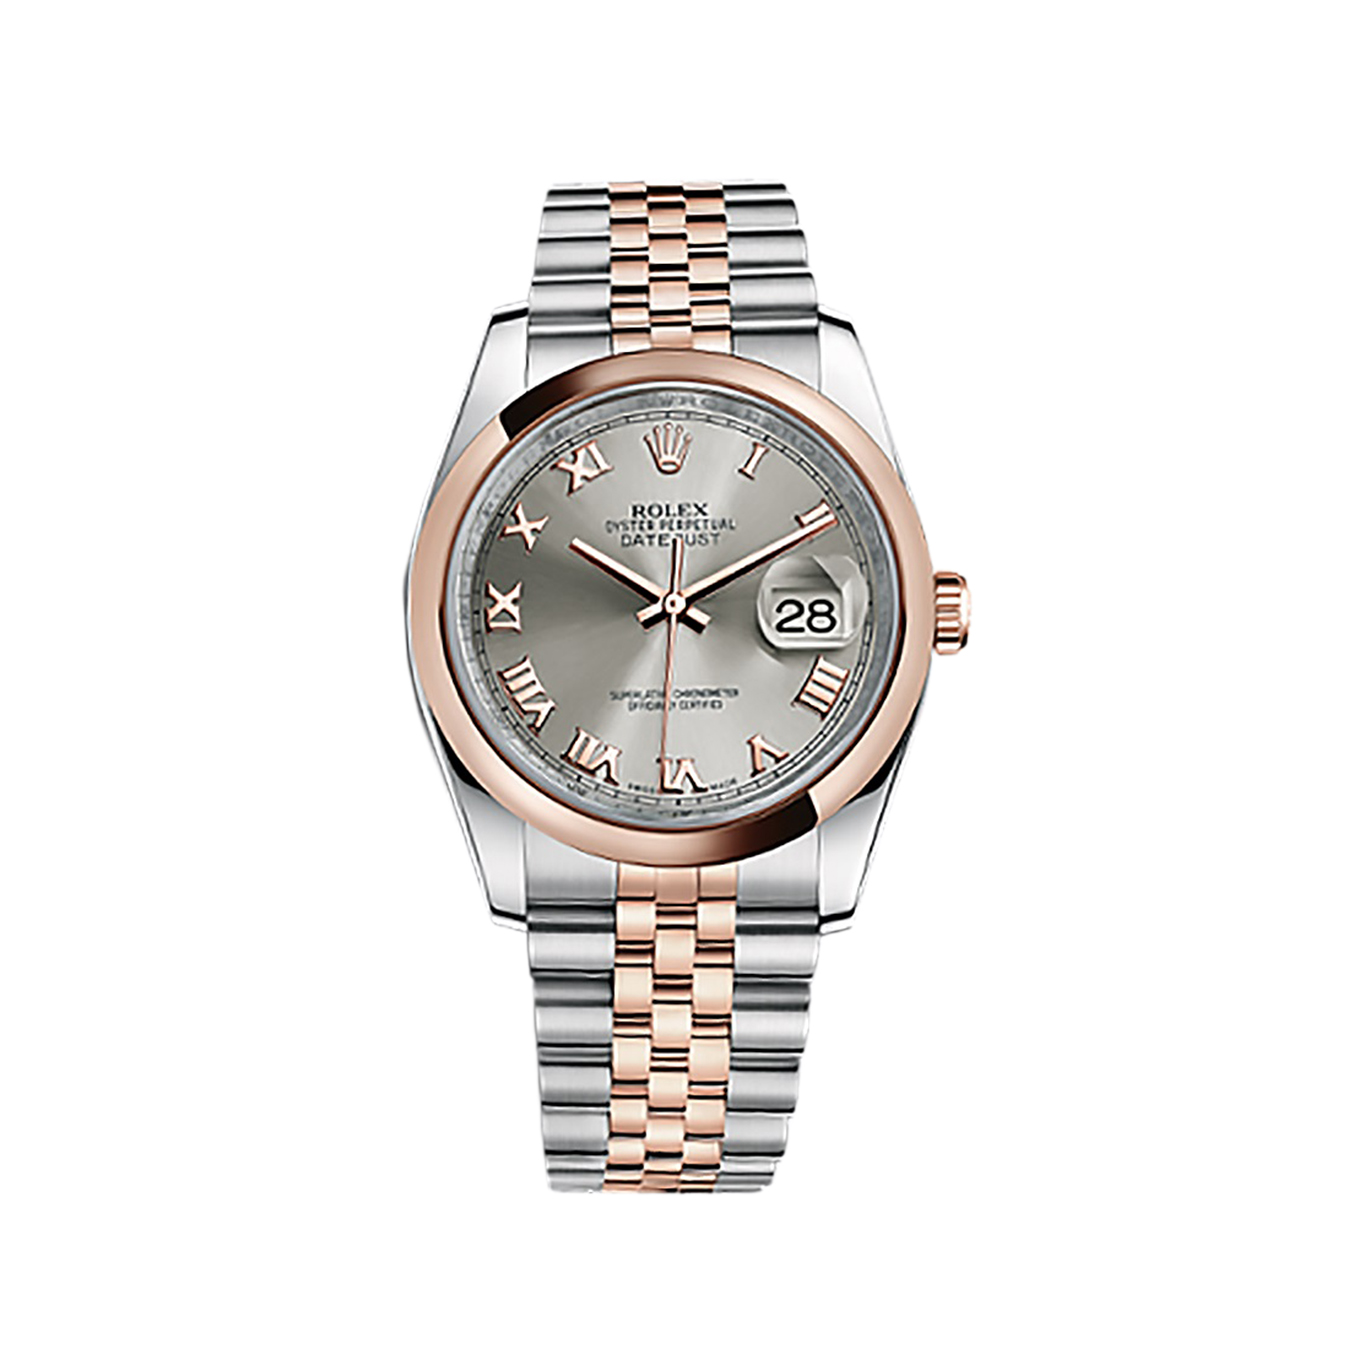 Datejust 36 116201 Rose Gold & Stainless Steel Watch (Steel)